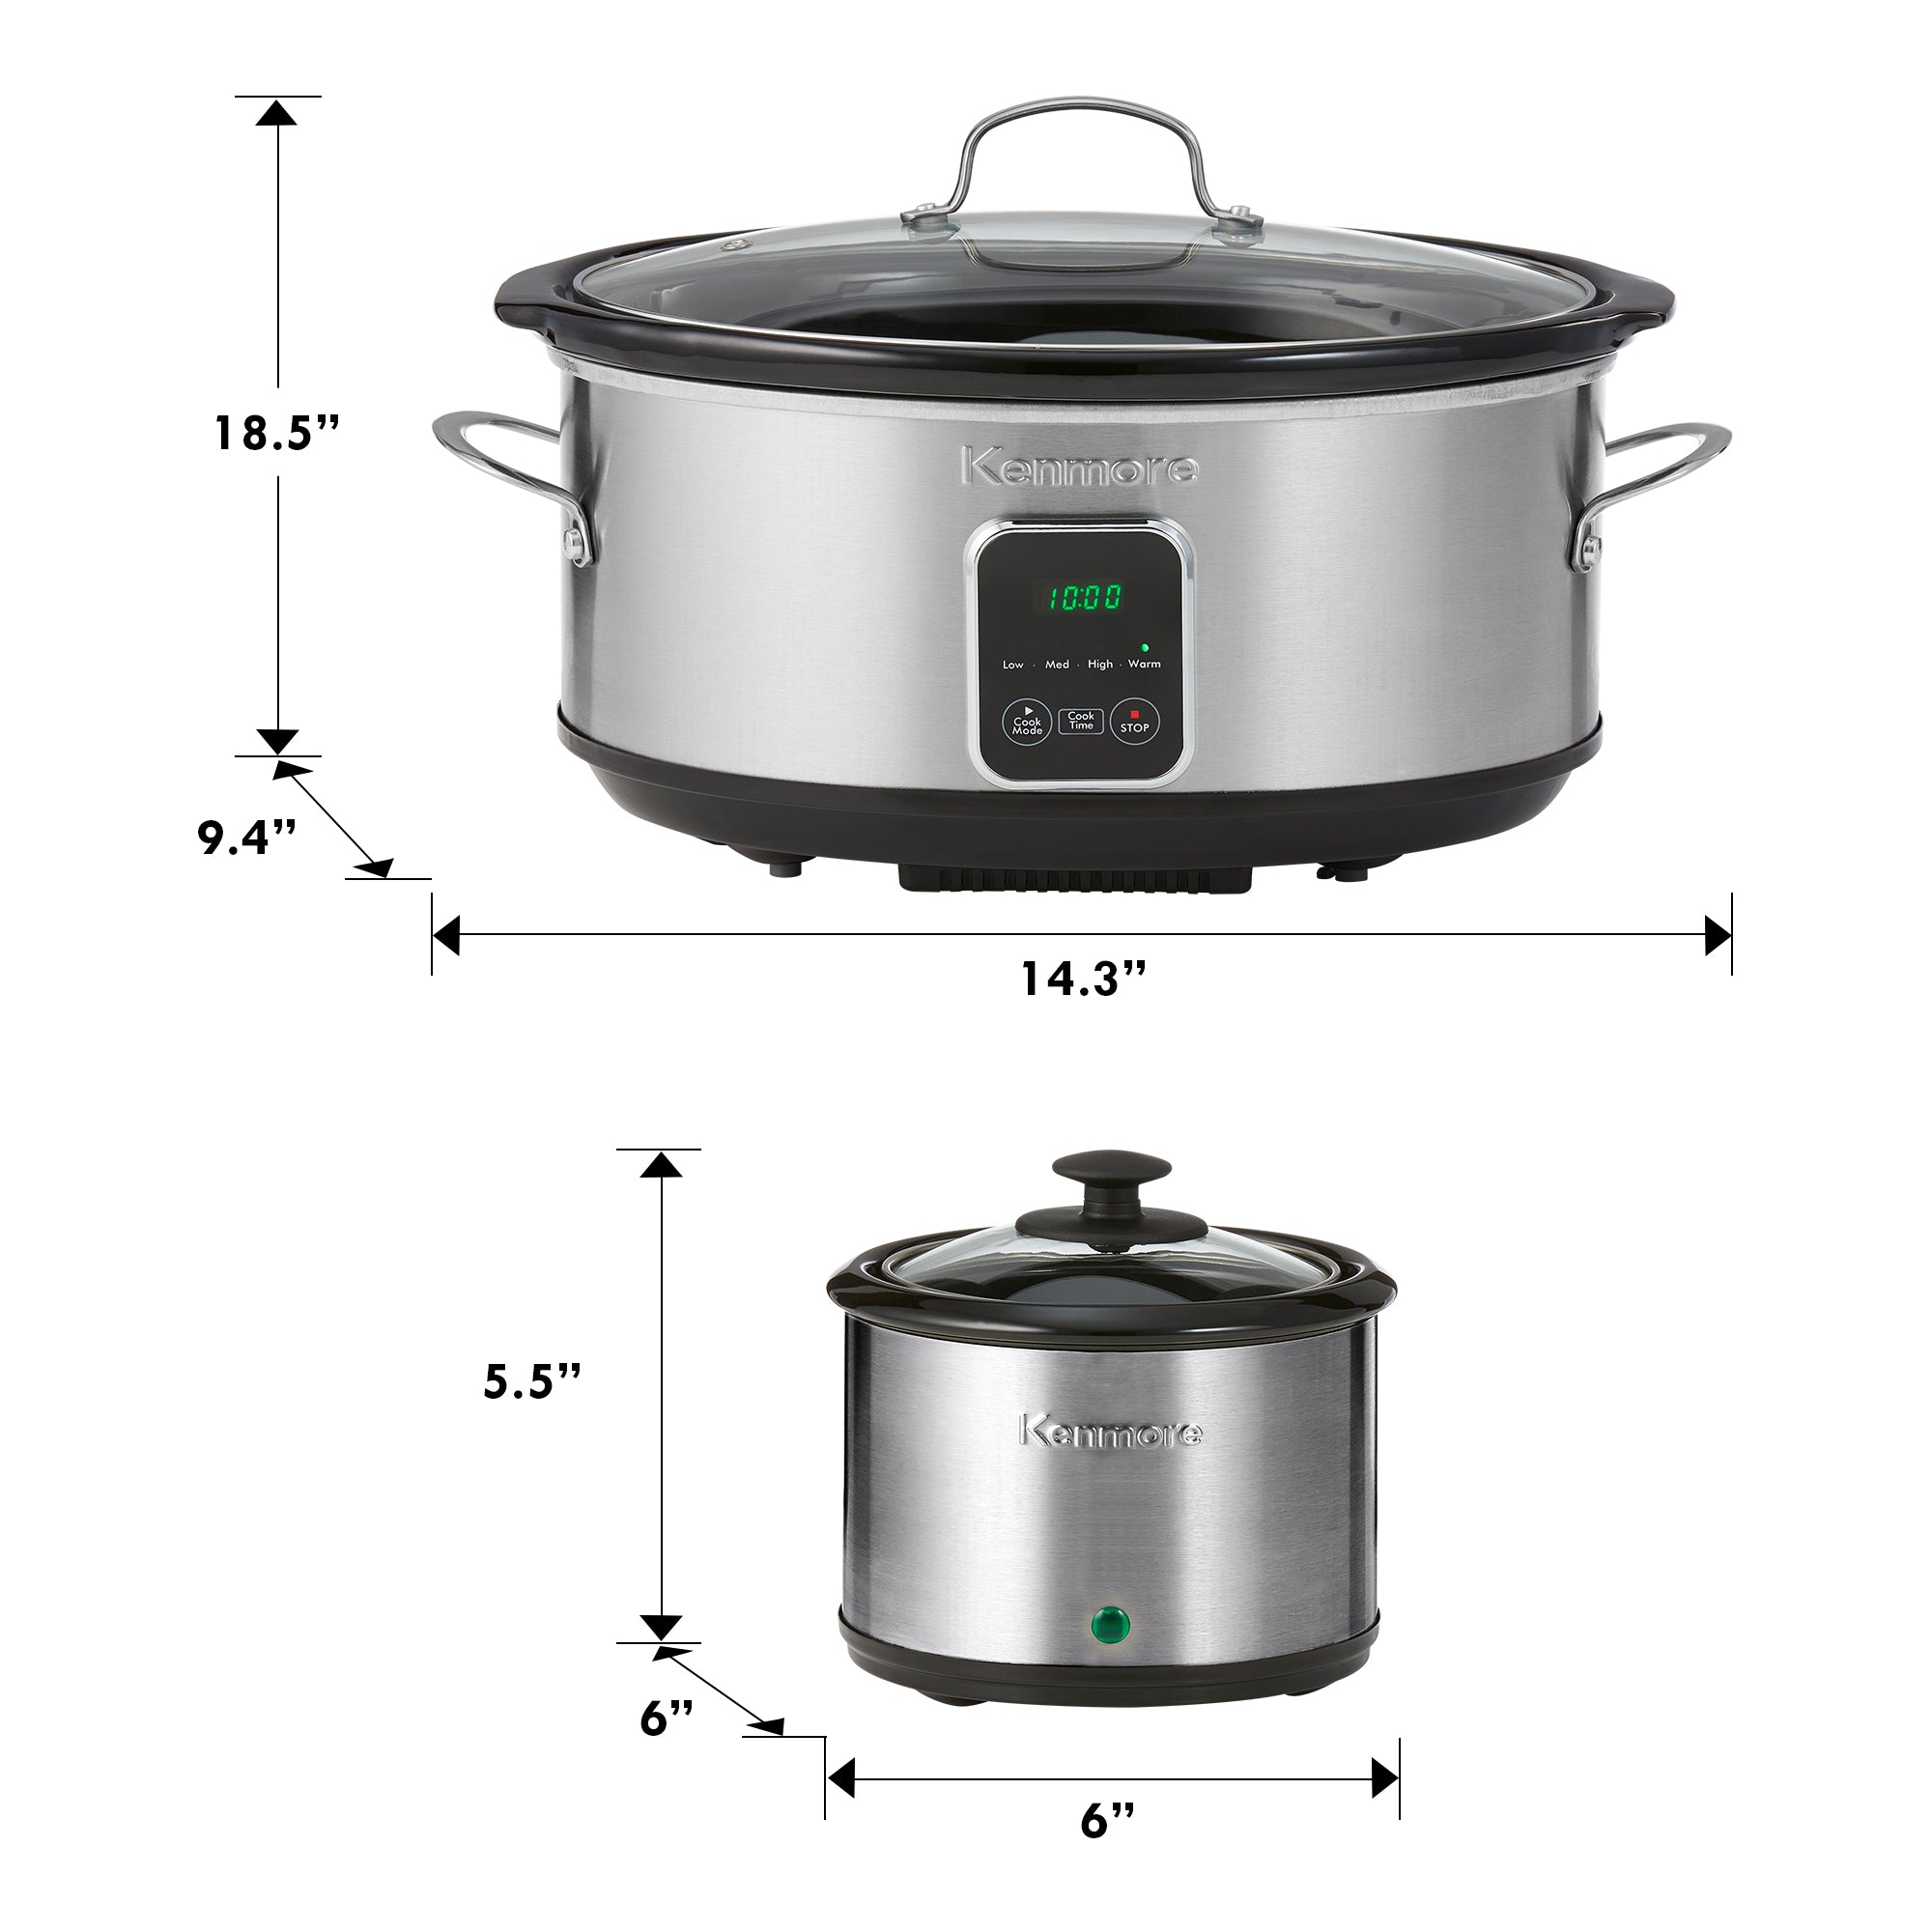 Kenmore 7 qt programmable slow cooker and sauce warmer on a white background with dimensions labeled